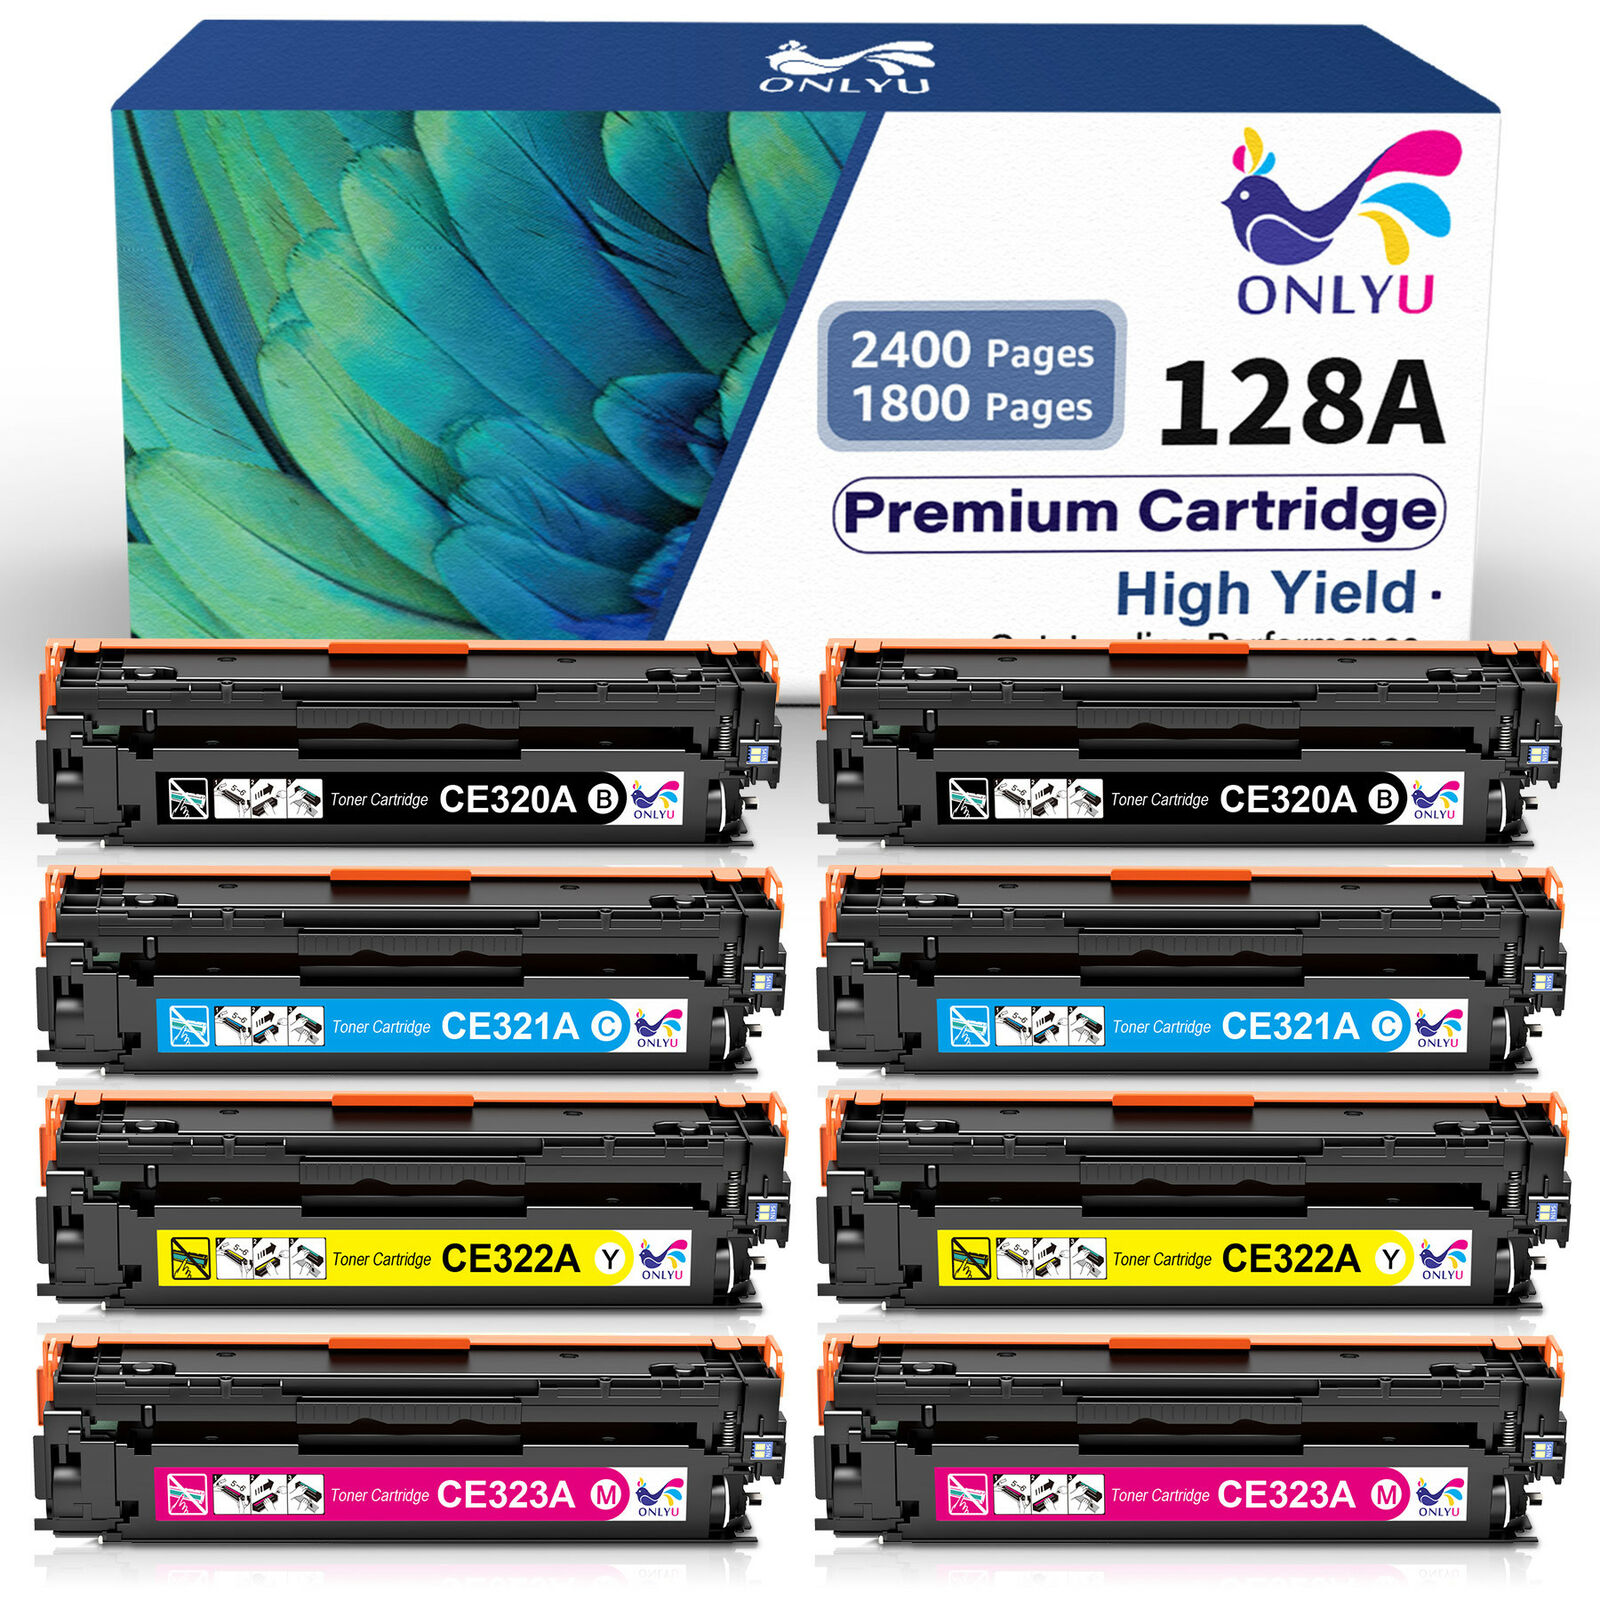 8PK High Yield Toner Cartridge CE320A -CE323A 128A For HP Color LaserJet CP1525n